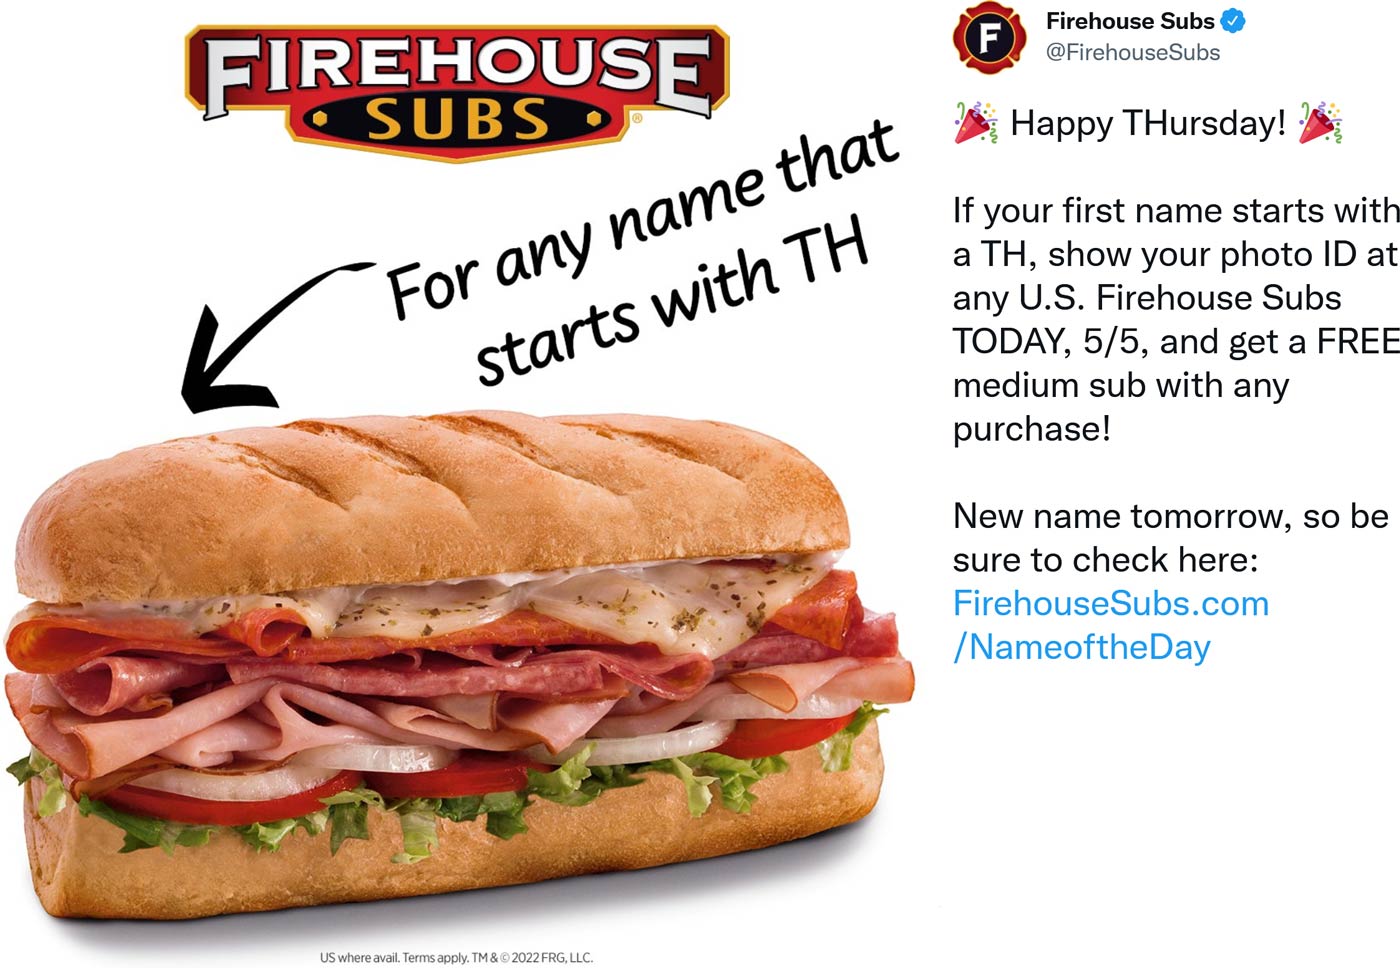 Firehouse Subs restaurants Coupon  Names that begin with TH enjoy a free sub sandwich today at Firehouse Subs #firehousesubs 